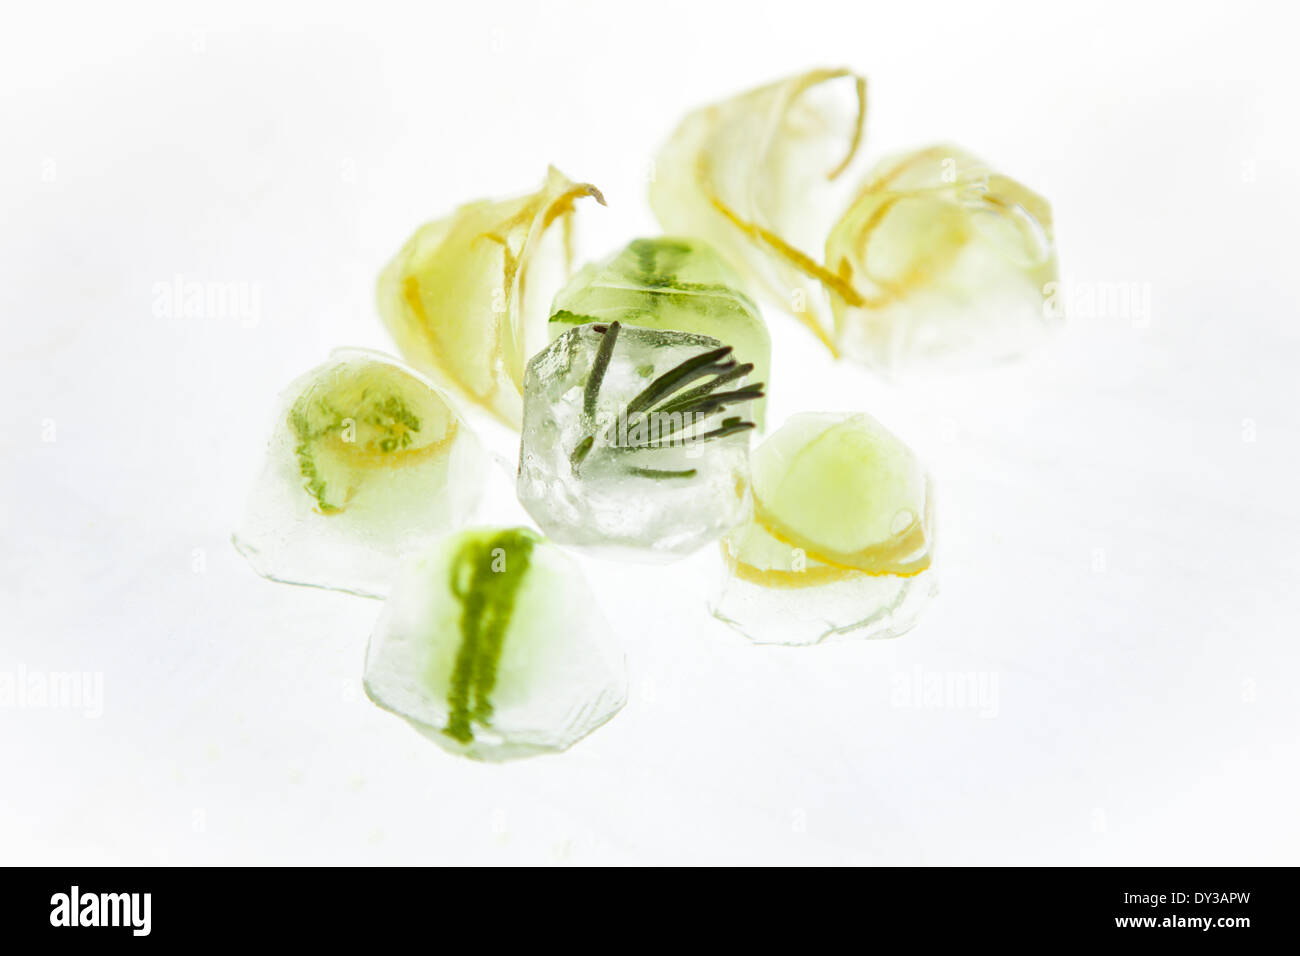 Citrus herb ice cubes on a high key backdrop Stock Photo